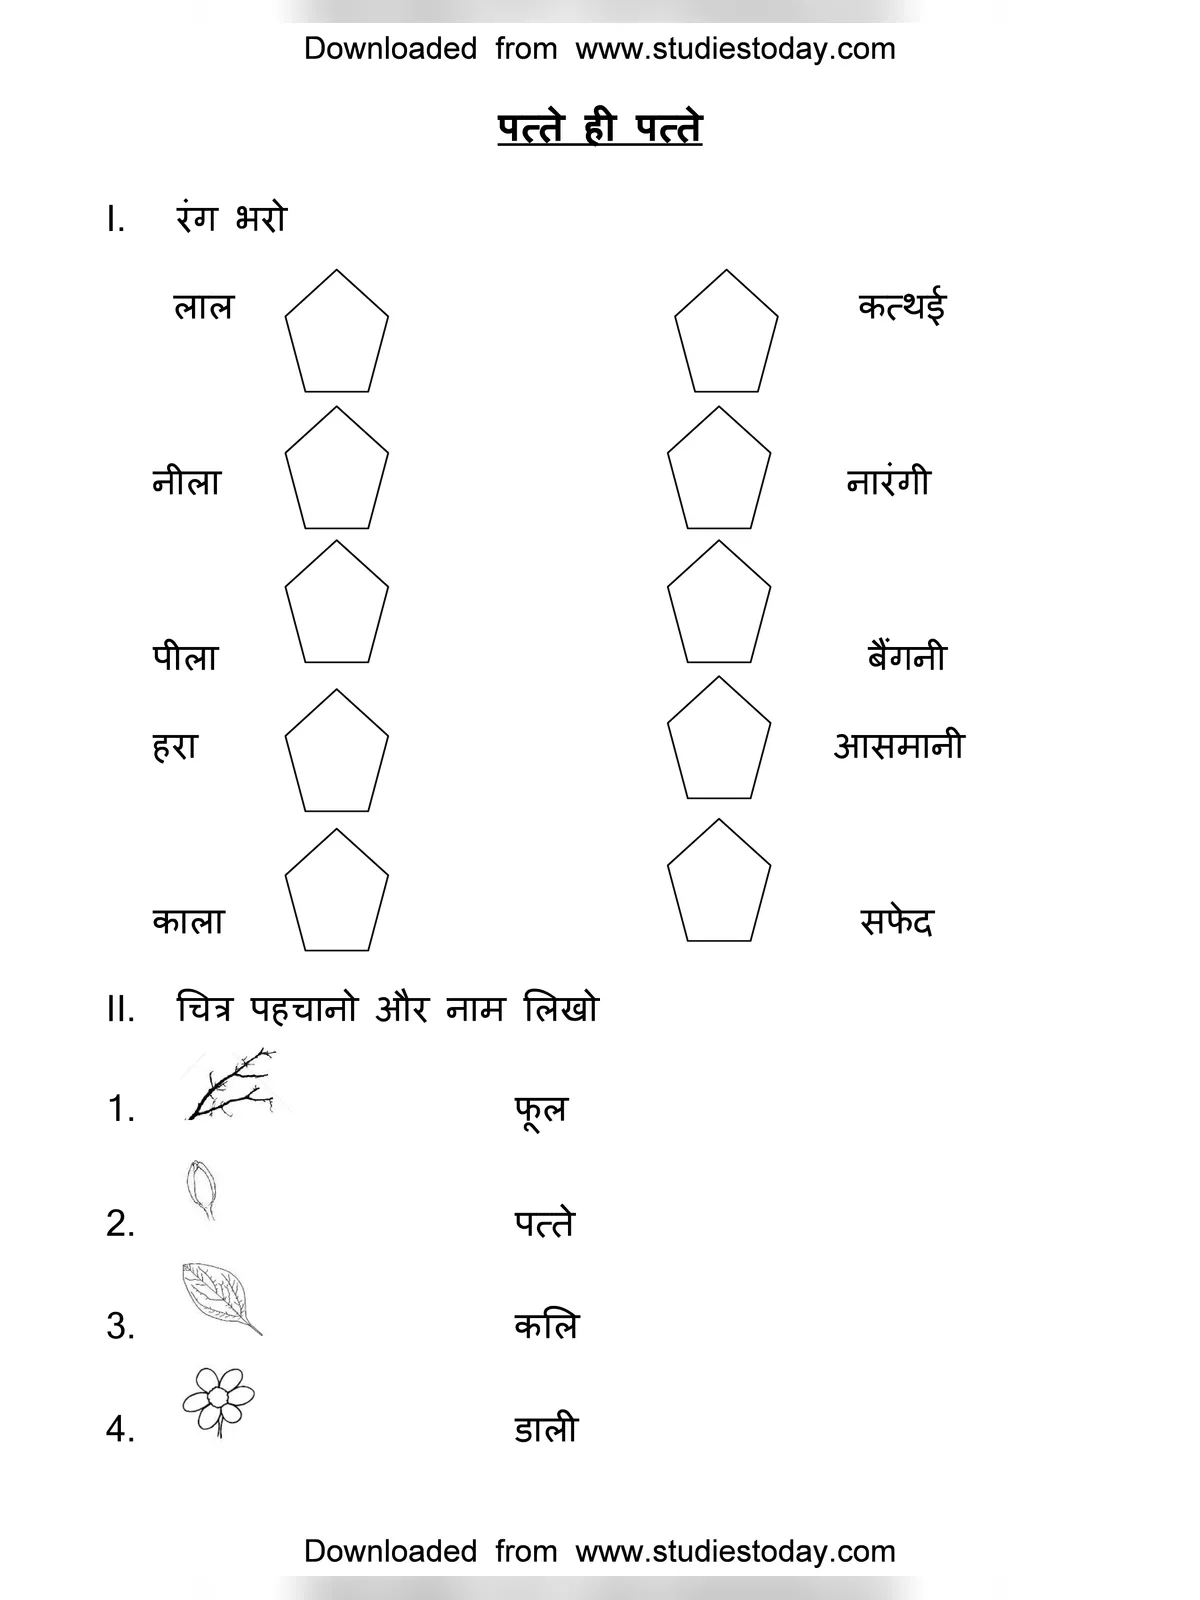 Hindi Worksheet for Class 1